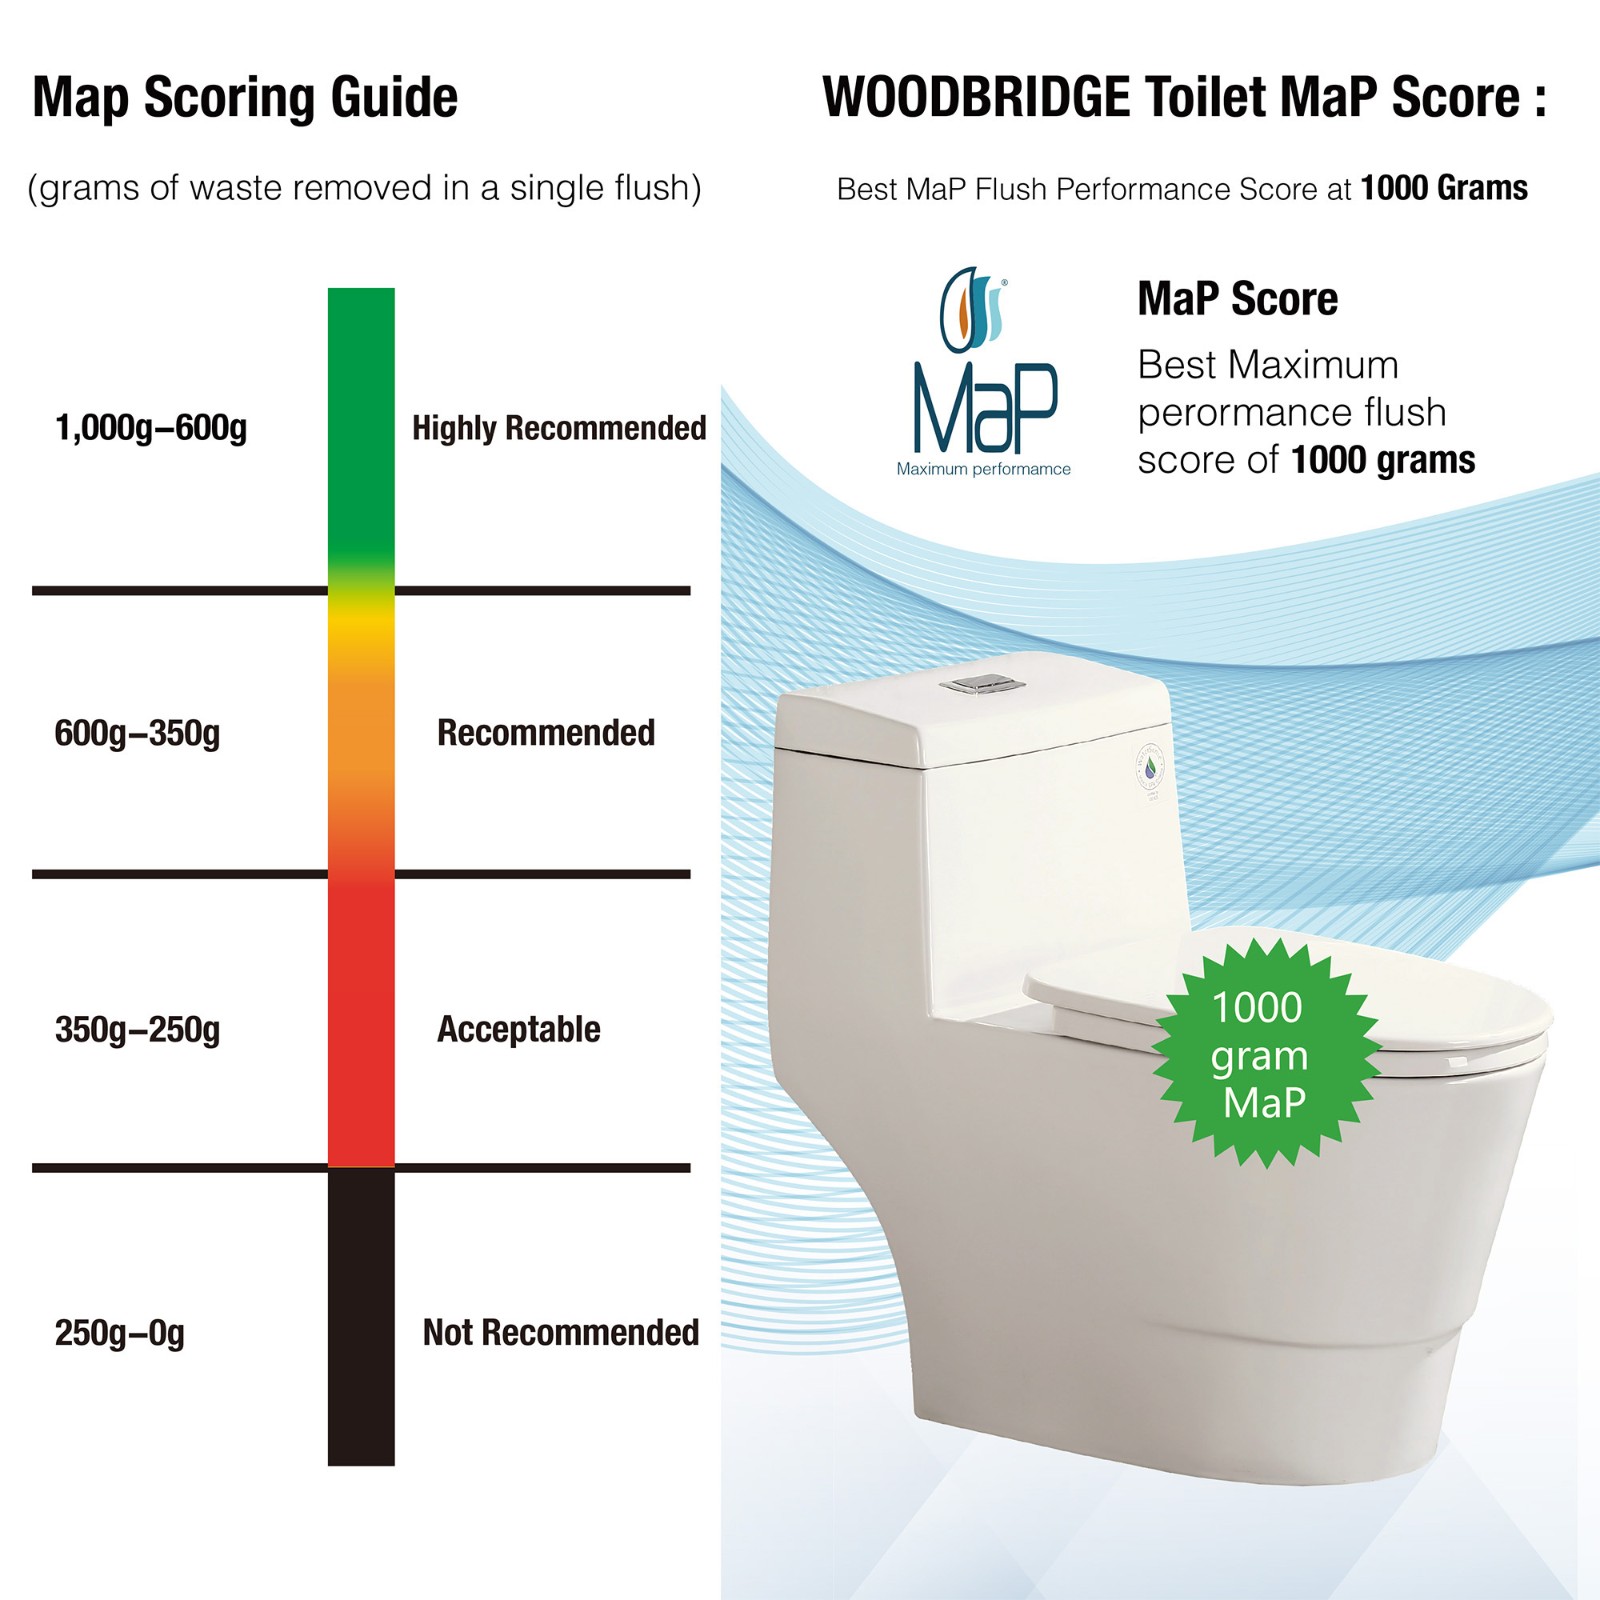  WOODBRIDGEE One Piece Toilet with Soft Closing Seat, Chair Height, 1.28 GPF Dual, Water Sensed, 1000 Gram MaP Flushing Score Toilet, B0942, Biscuit_5361